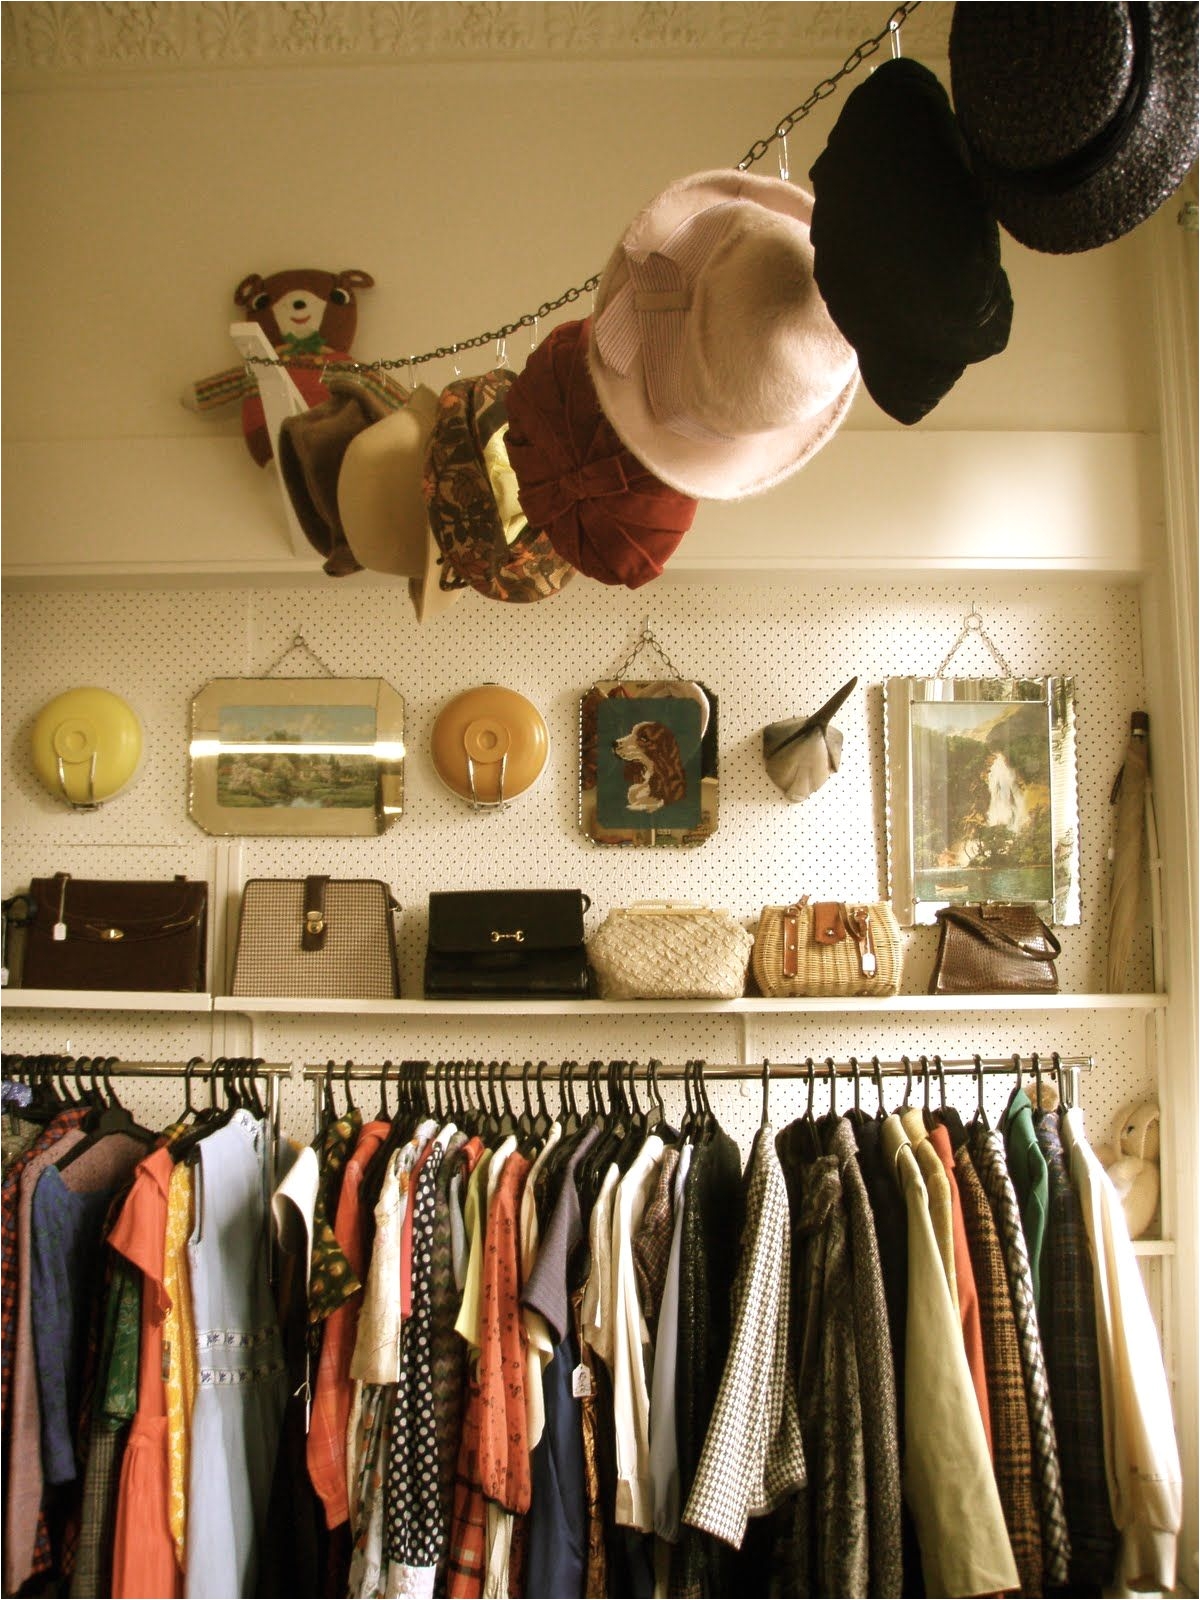 hat storage idea clothes pins s hooks or curtain hangers decorated top shelf area of the closet with purses extras